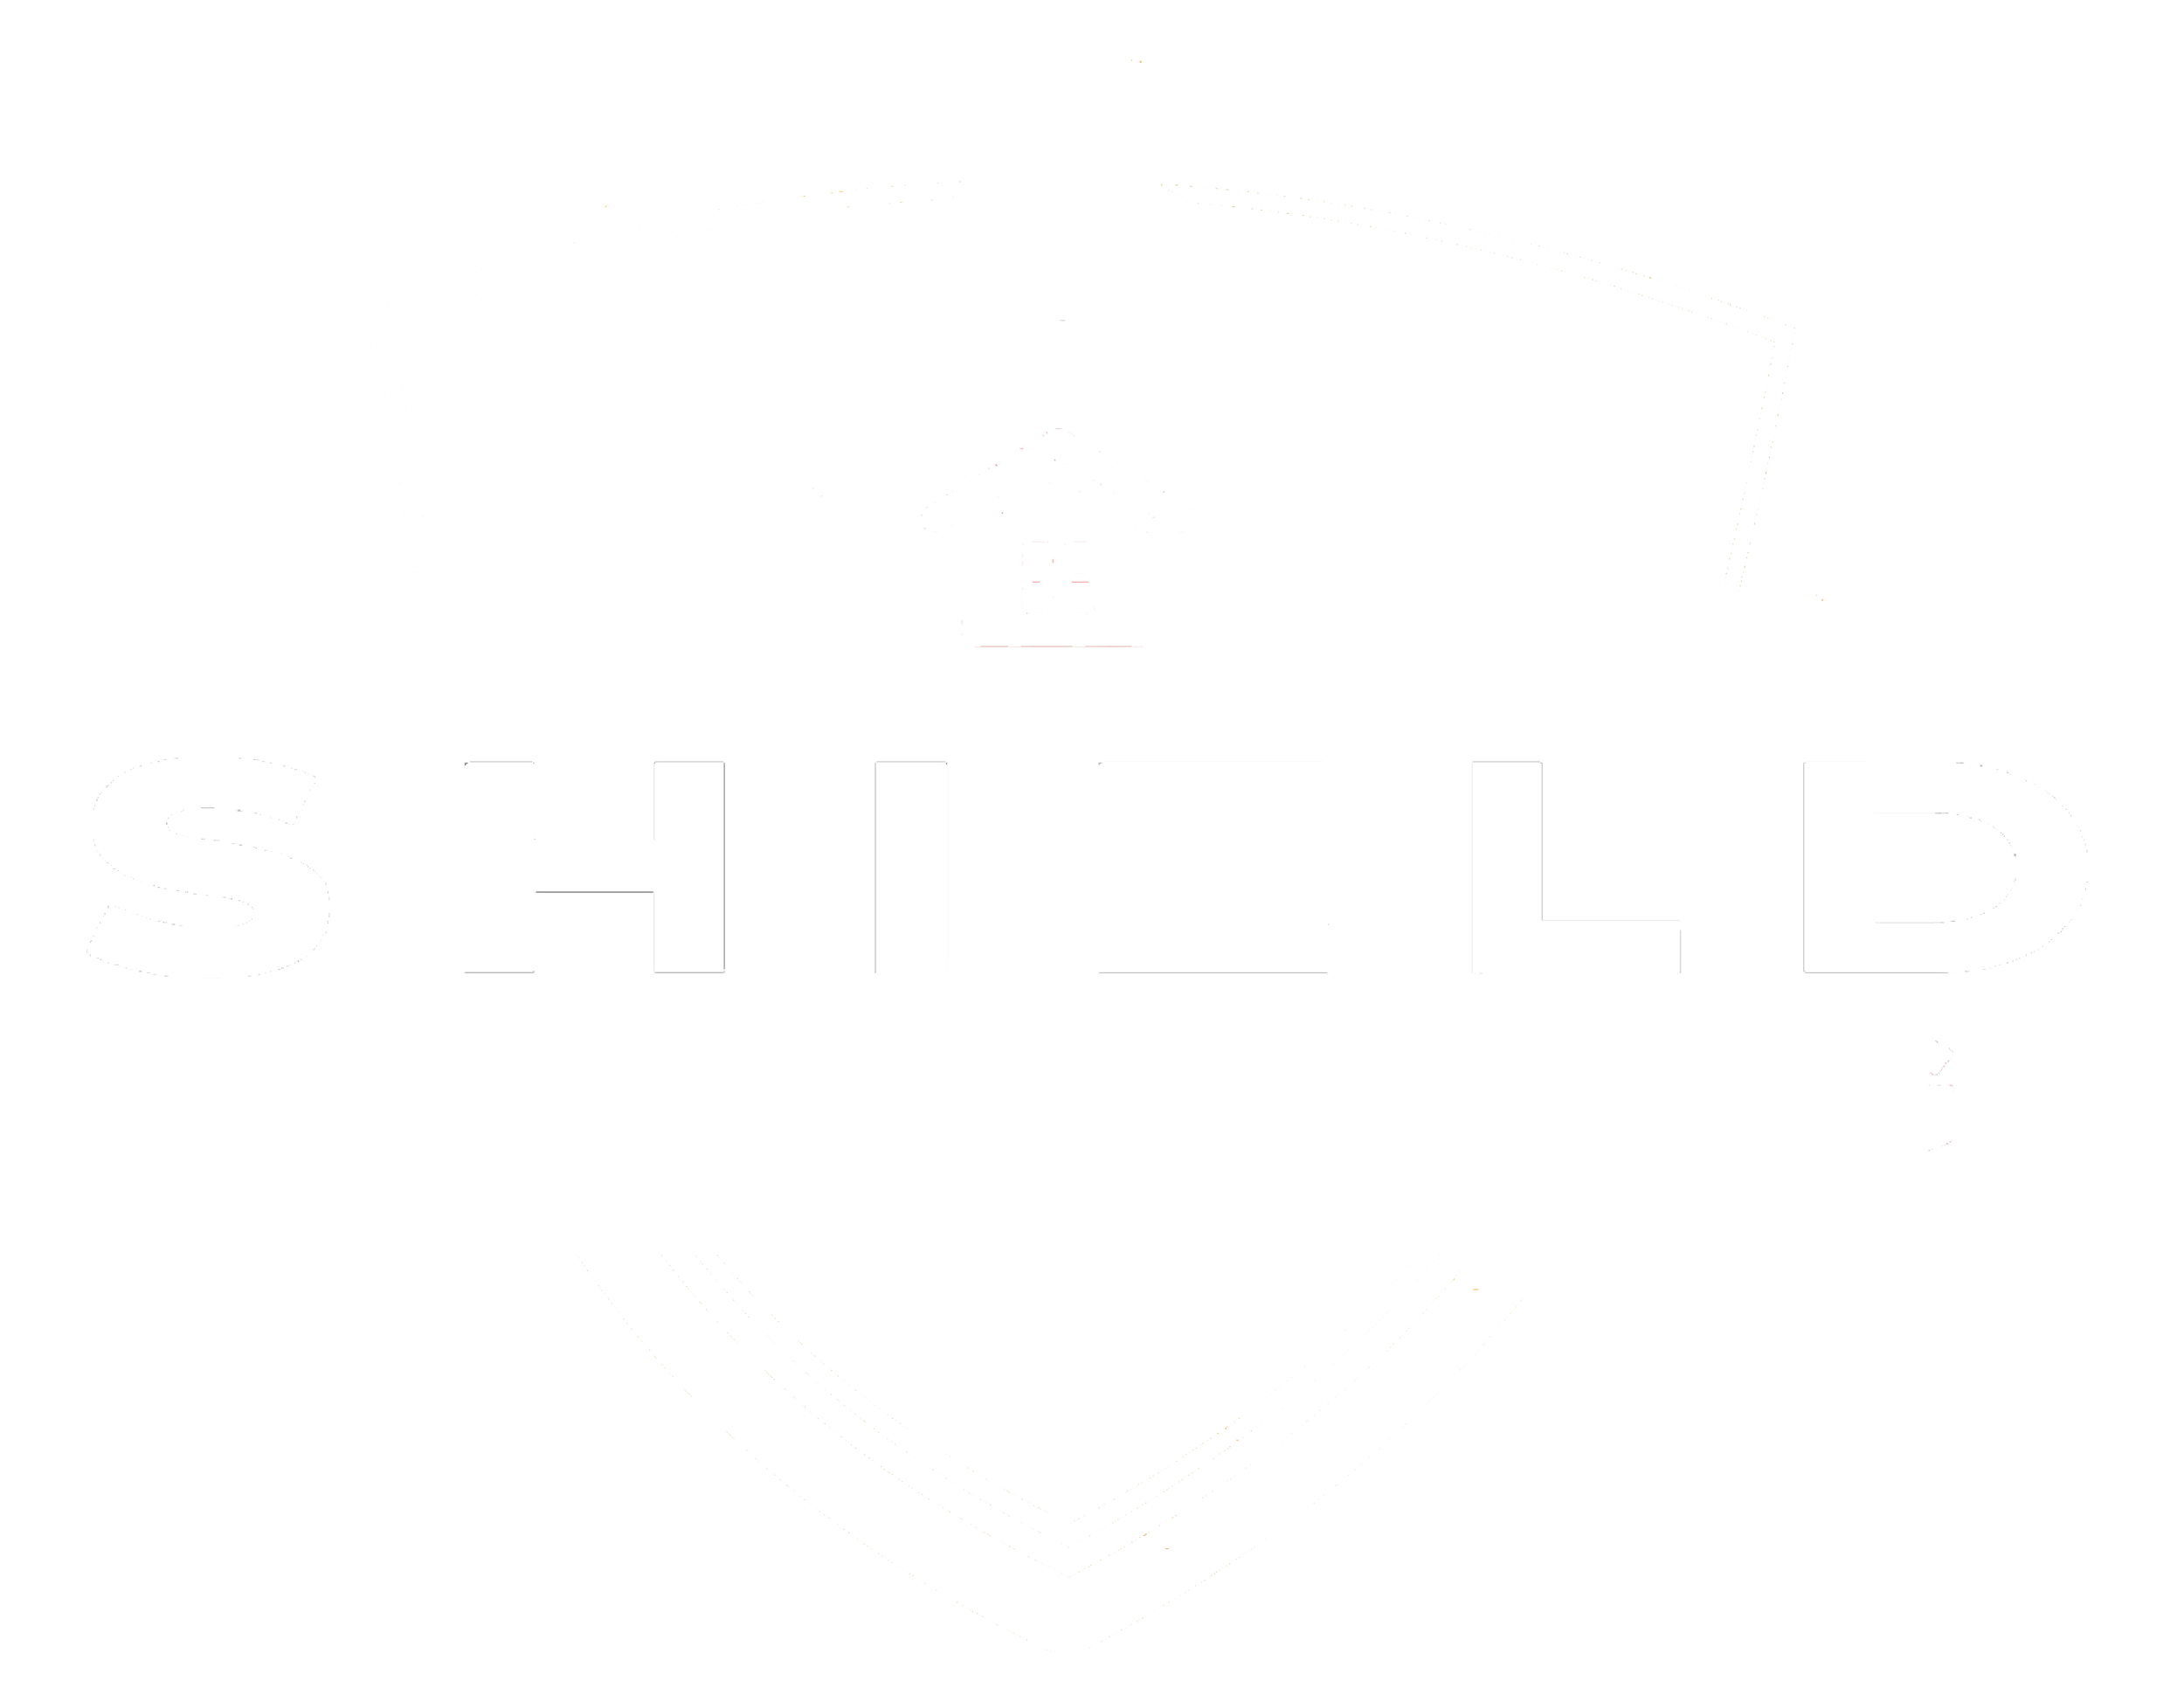 Shield Roofing Company in Virginia